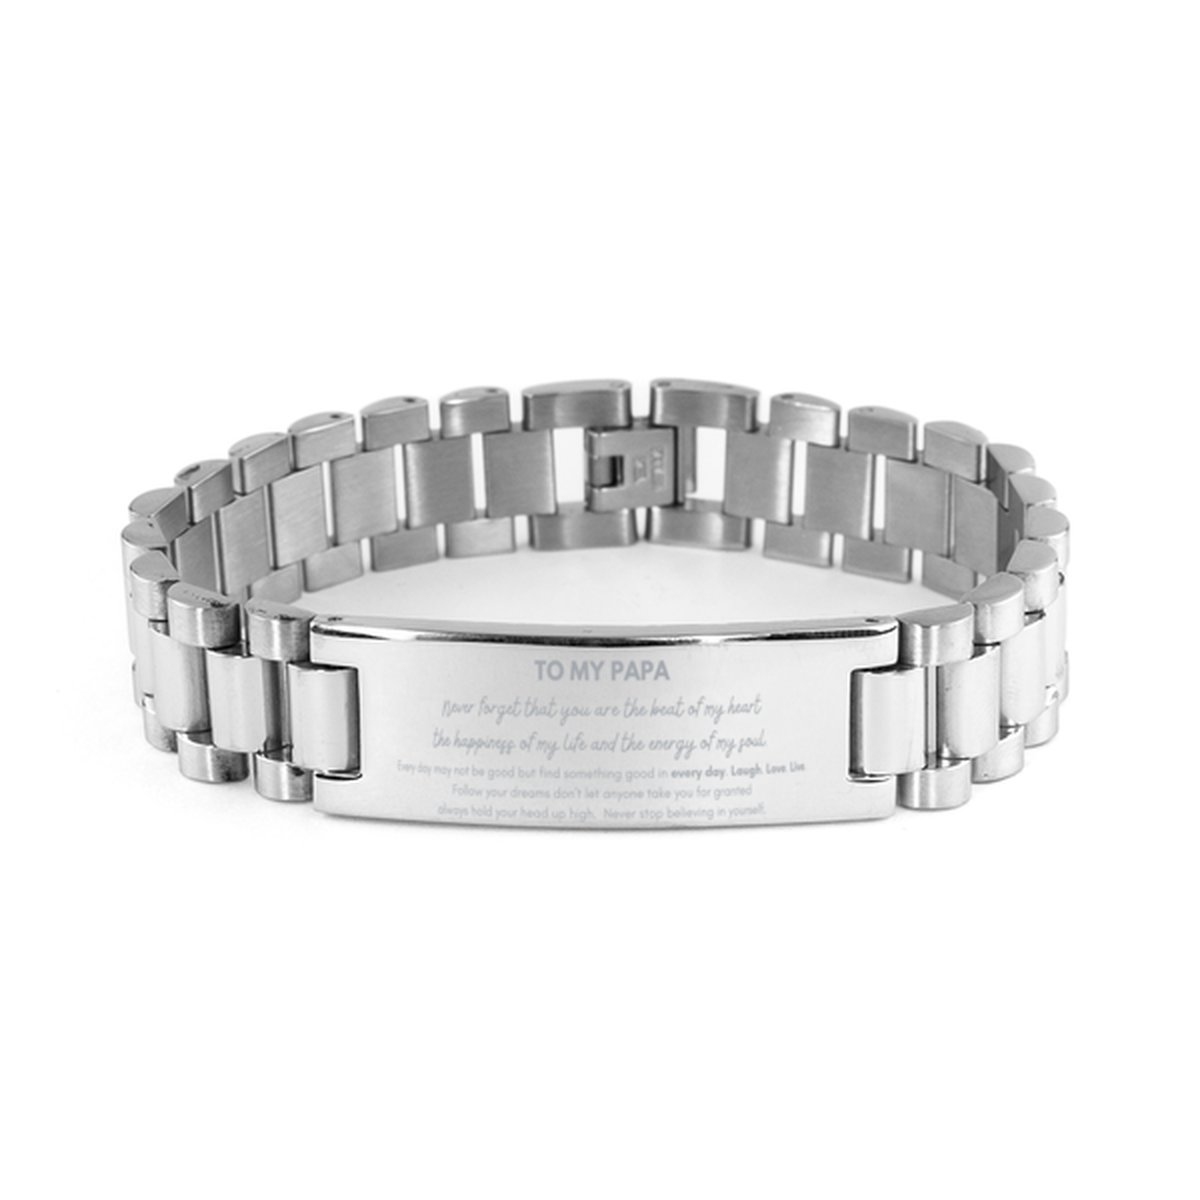 To My Papa Bracelet Gifts, Christmas Papa Ladder Stainless Steel Bracelet Present, Birthday Unique Motivational For Papa, To My Papa Never forget that you are the beat of my heart the happiness of my life and the energy of my soul